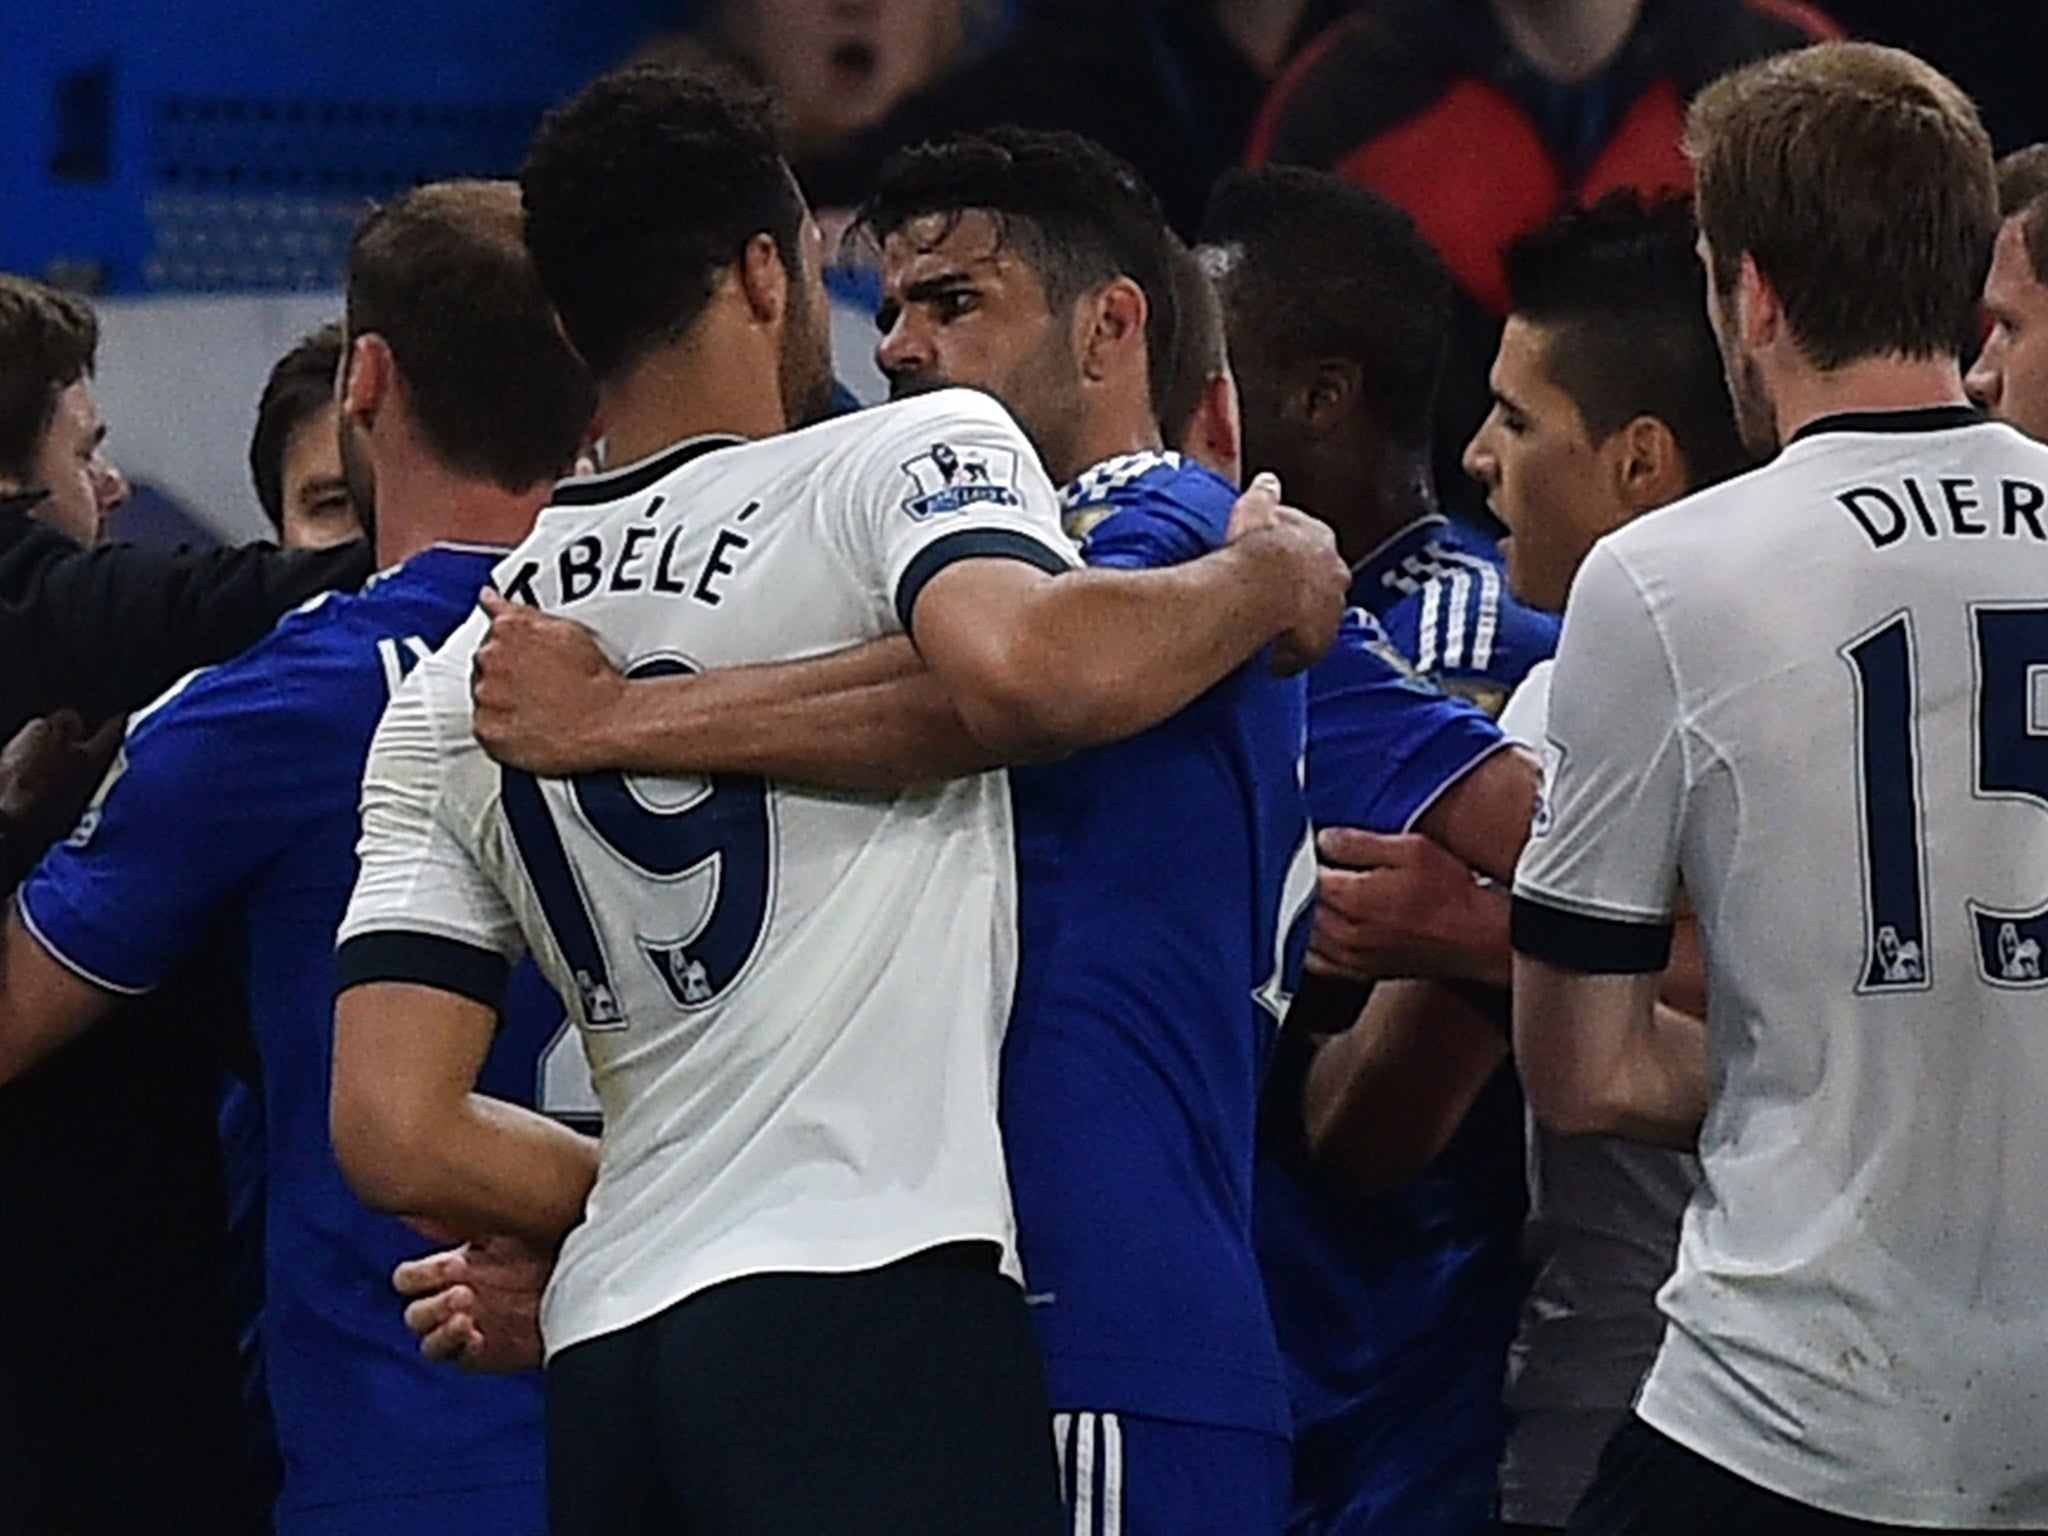 Mousa Dembele has been banned for six games for eye-gouging Diego Costa